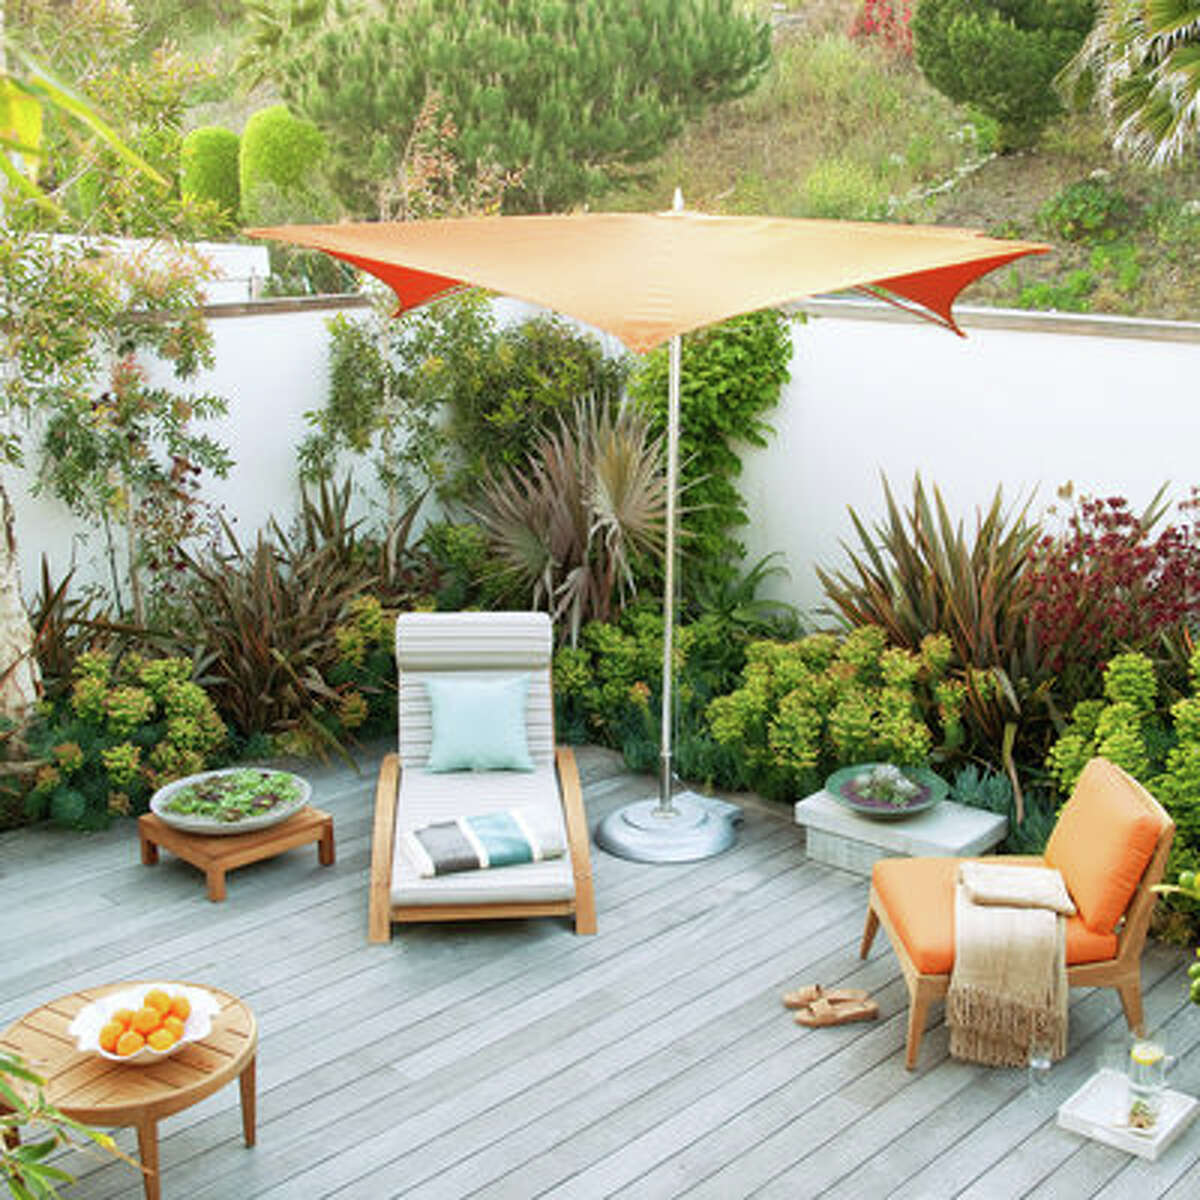 Staycation Bring out the striped cushions and colorful umbrellas, and get transported to a dream vacation spot right in your backyard. The deck is made of sustainable ipe wood that has weathered to a soft gray. Drought-tolerant plants need only yearly trimming and occasional watering—which leaves plenty of time to kick back on a lounge chair and bask in the sun.